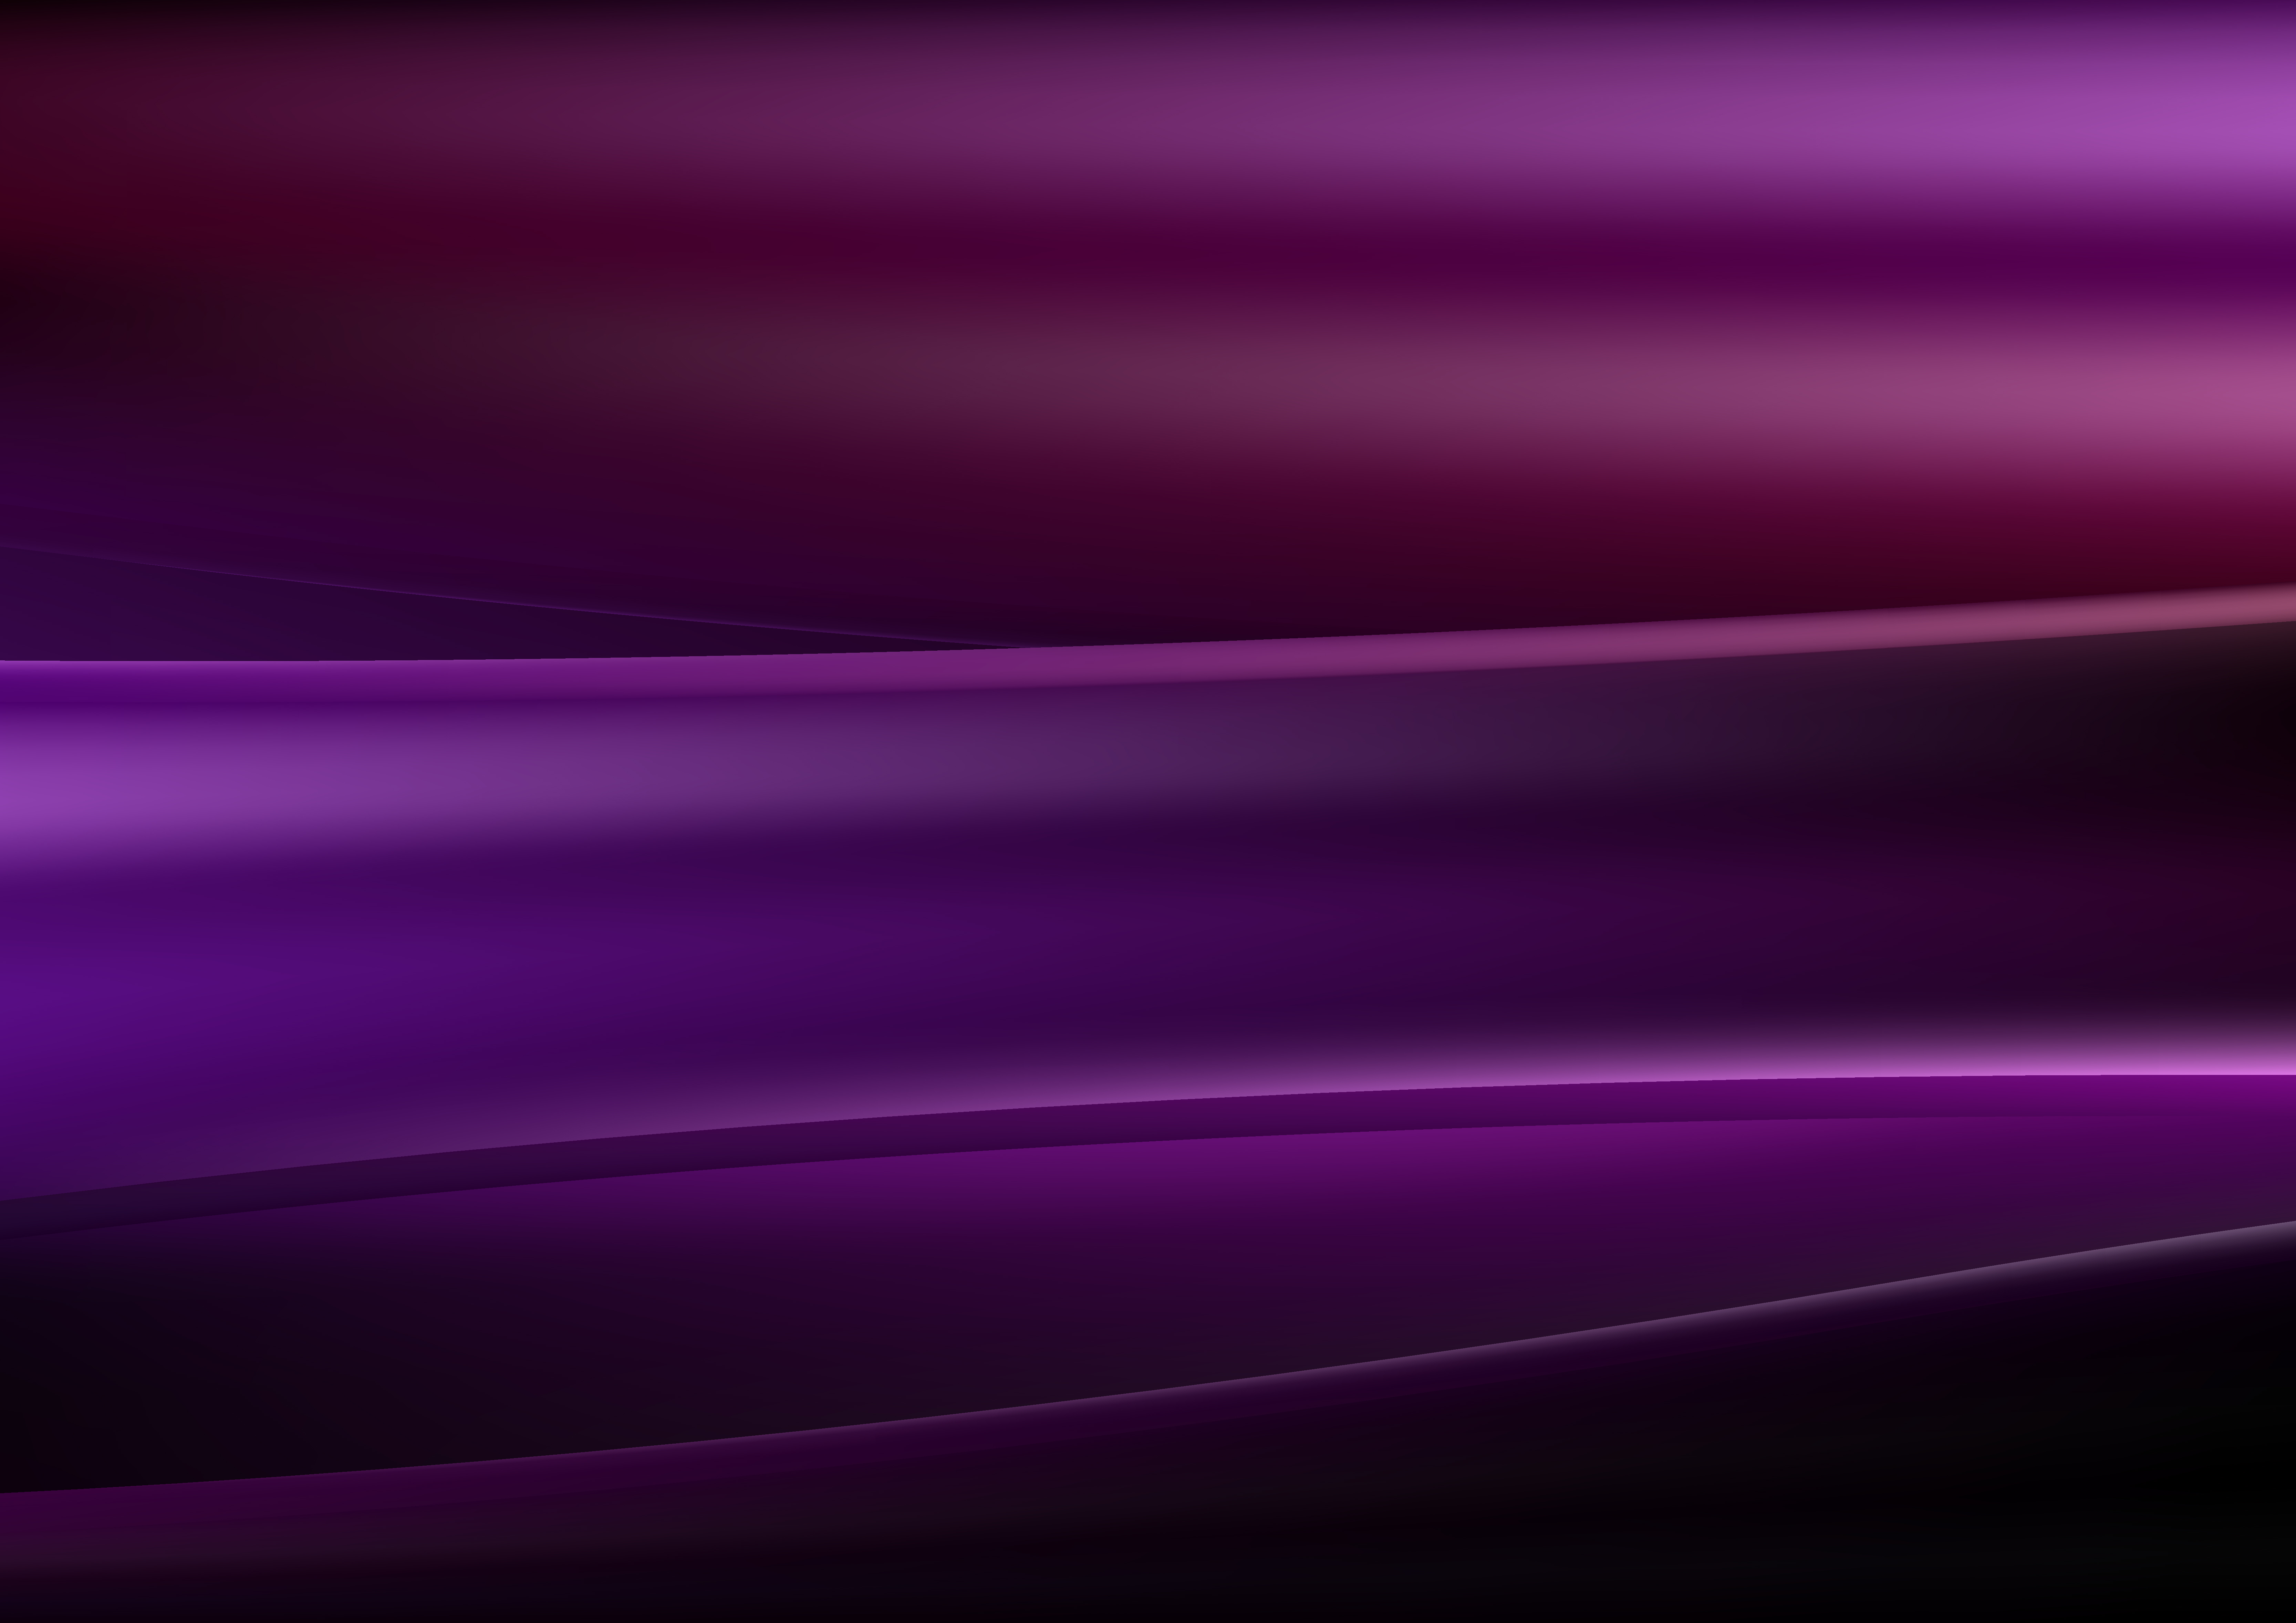 Free Abstract Purple and Black Background Design